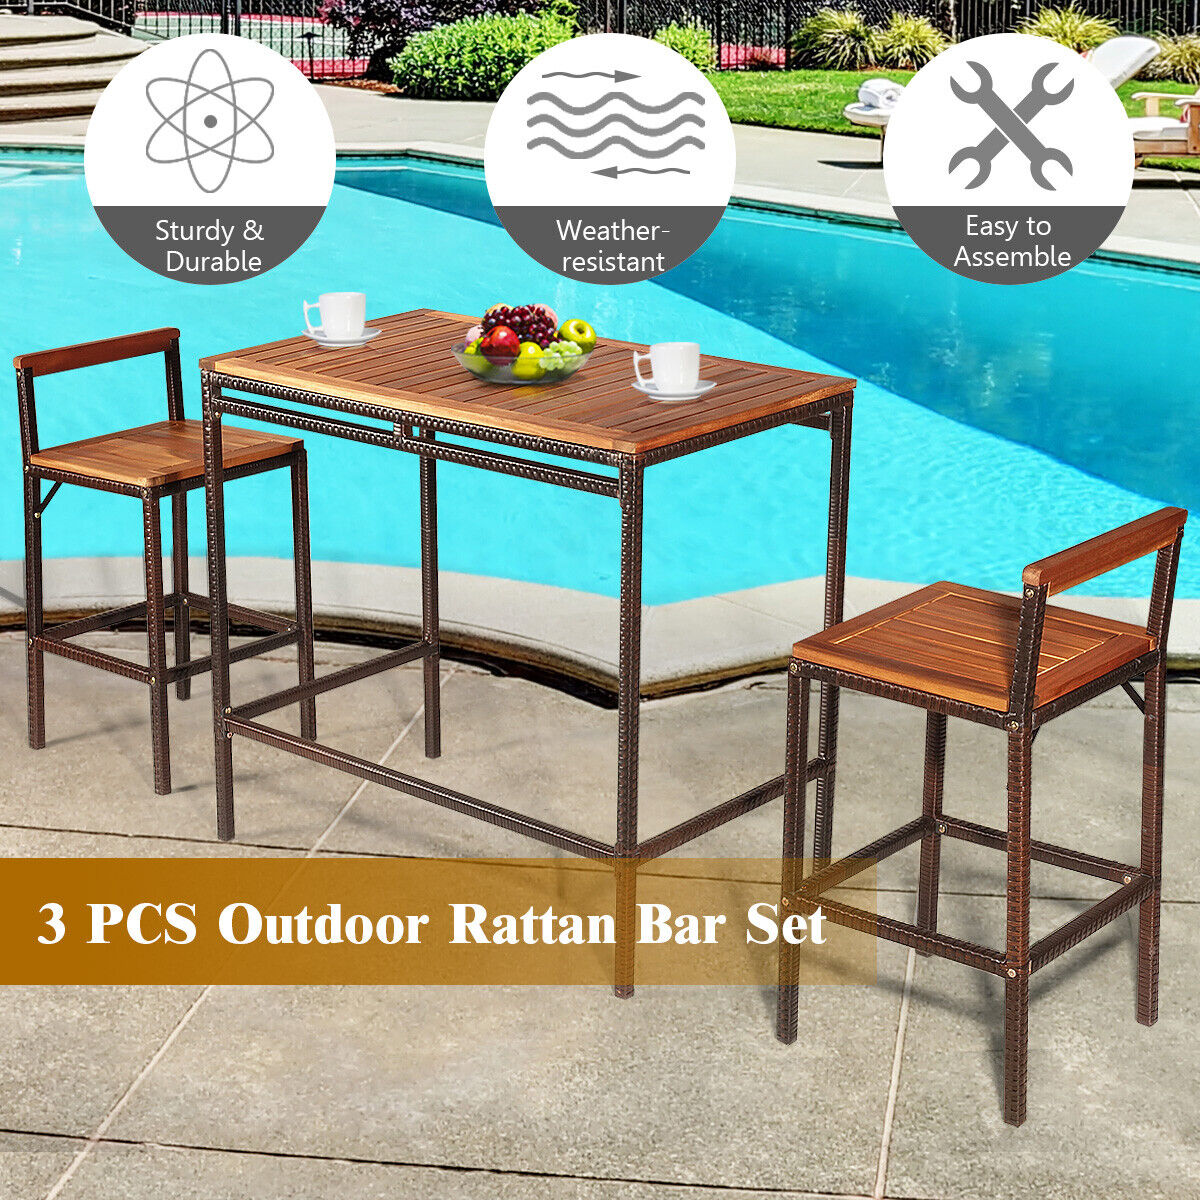 3 PCS Patio Rattan Wicker Bar Dining Furniture Set wood Table Chair Outdoor